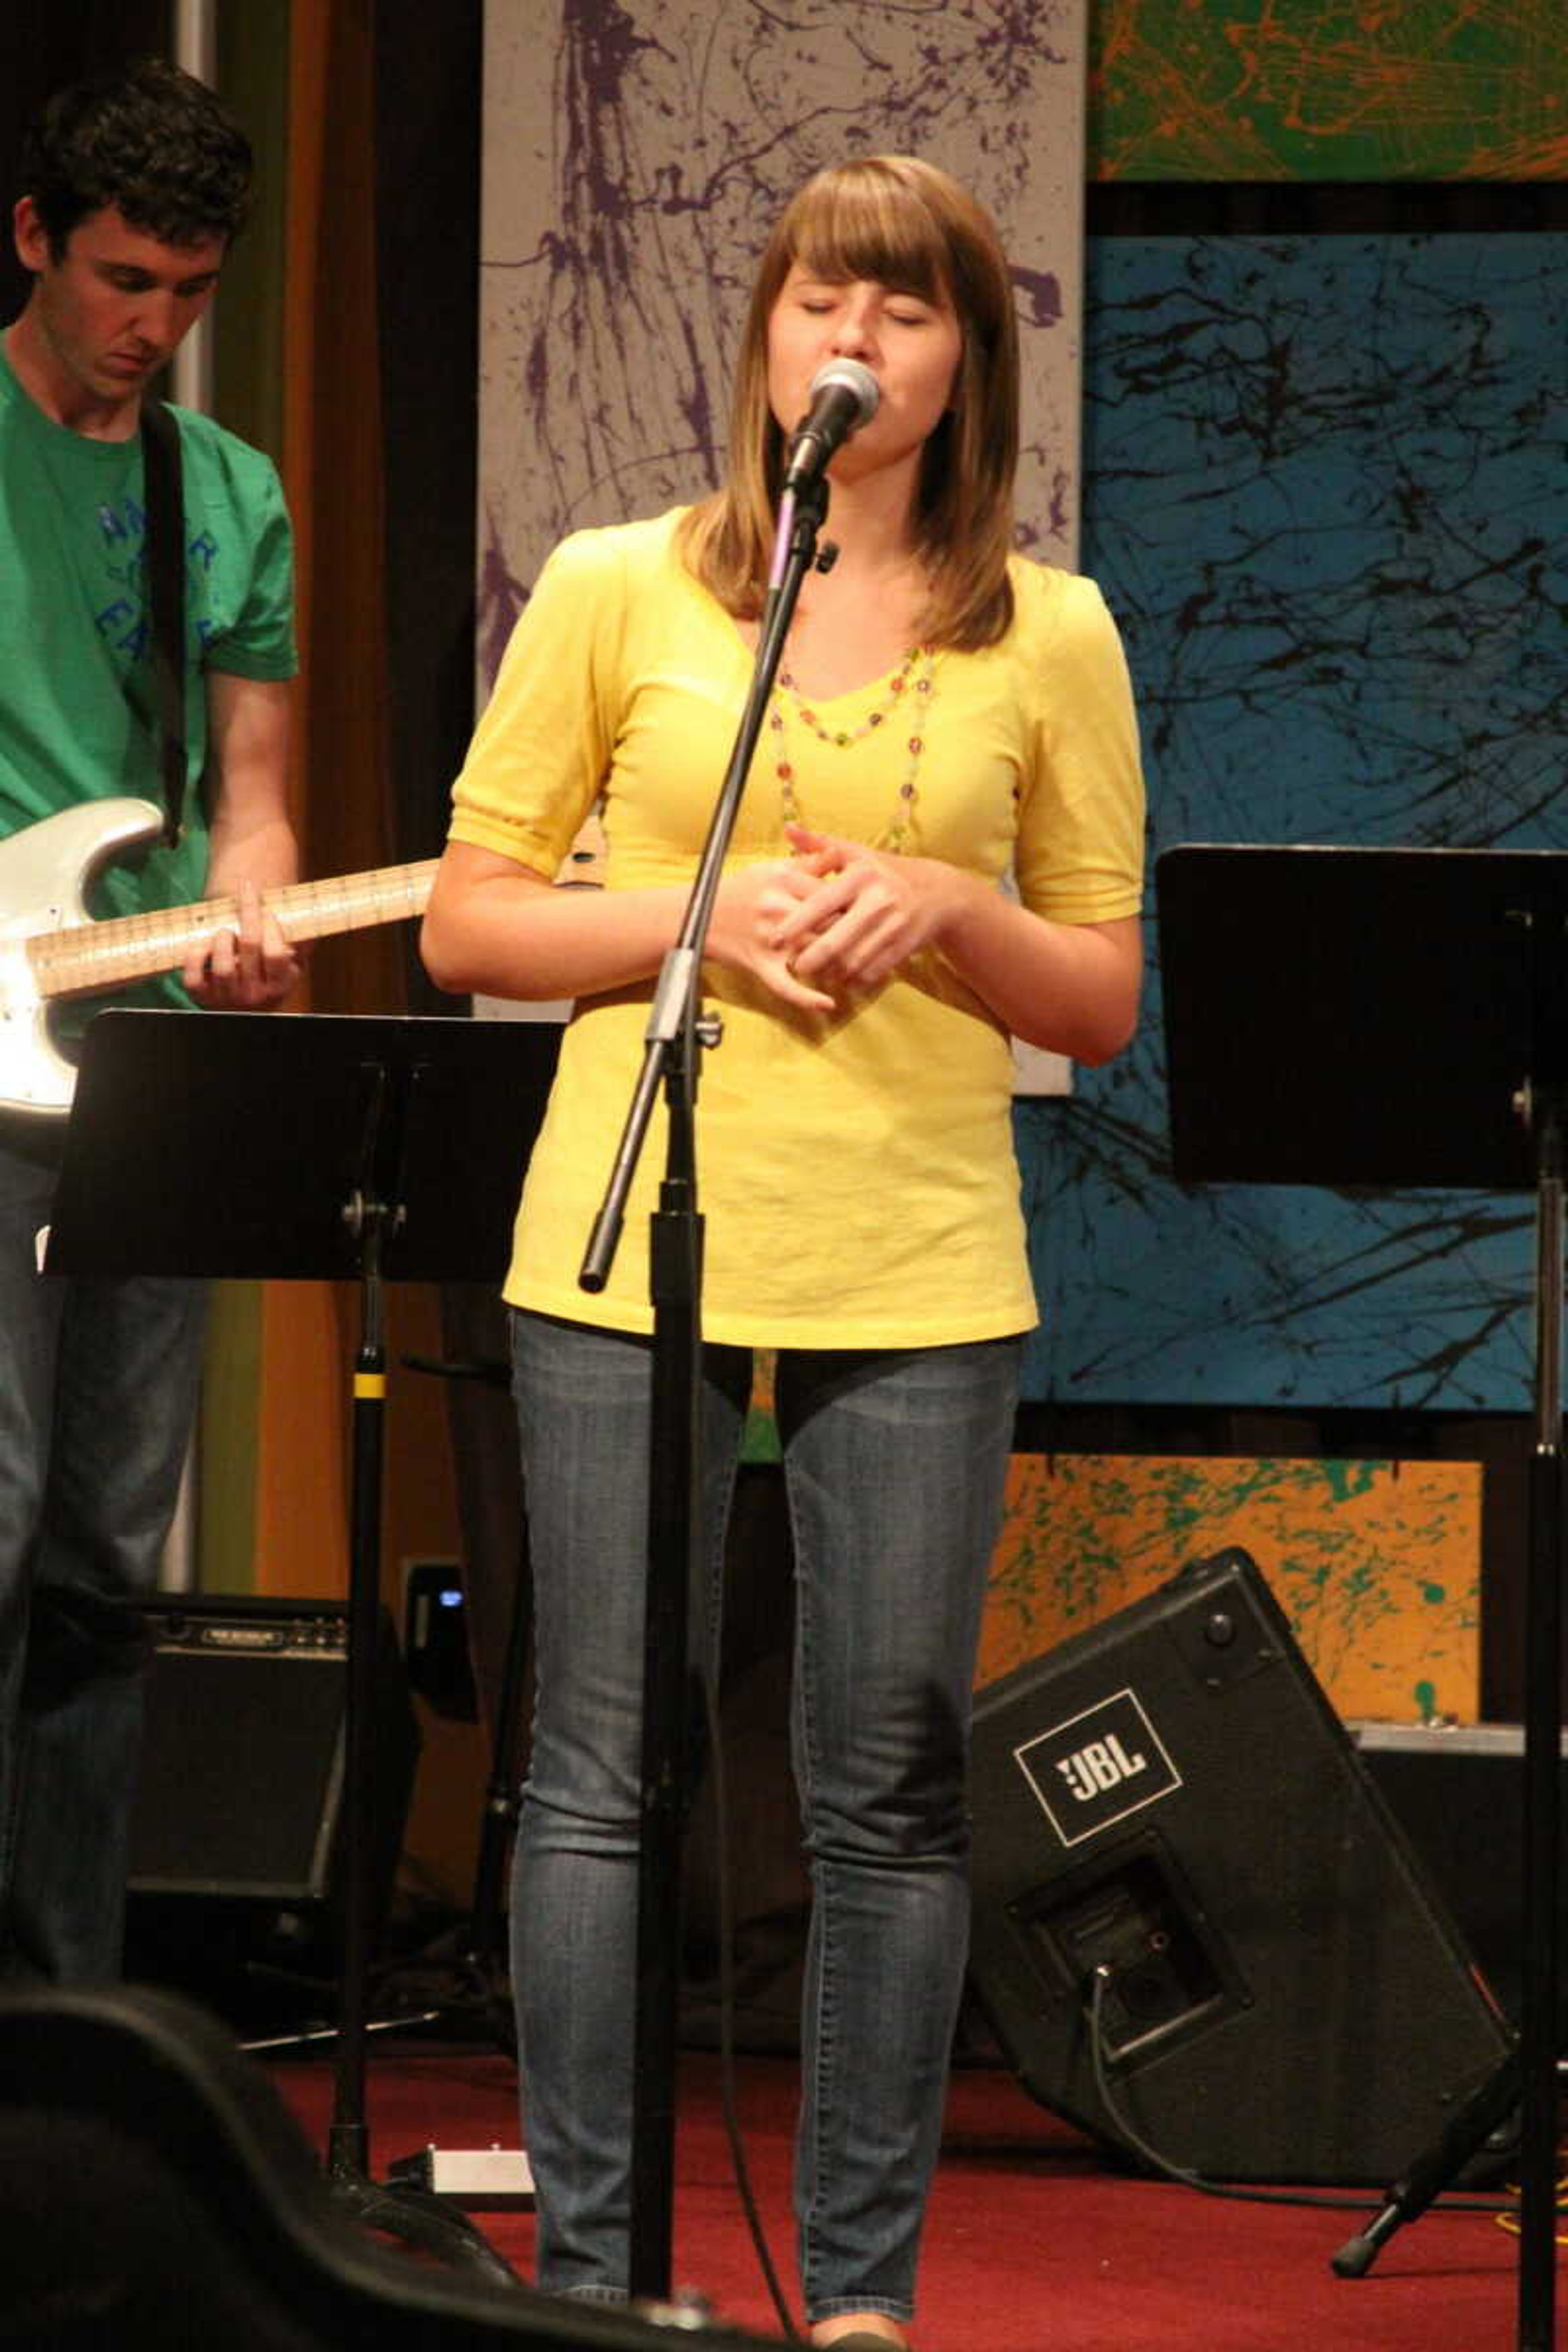 Kylie Goodier, a member of the Ignite worship team, sang at the worship night on Friday. -photo by Kelso Hope